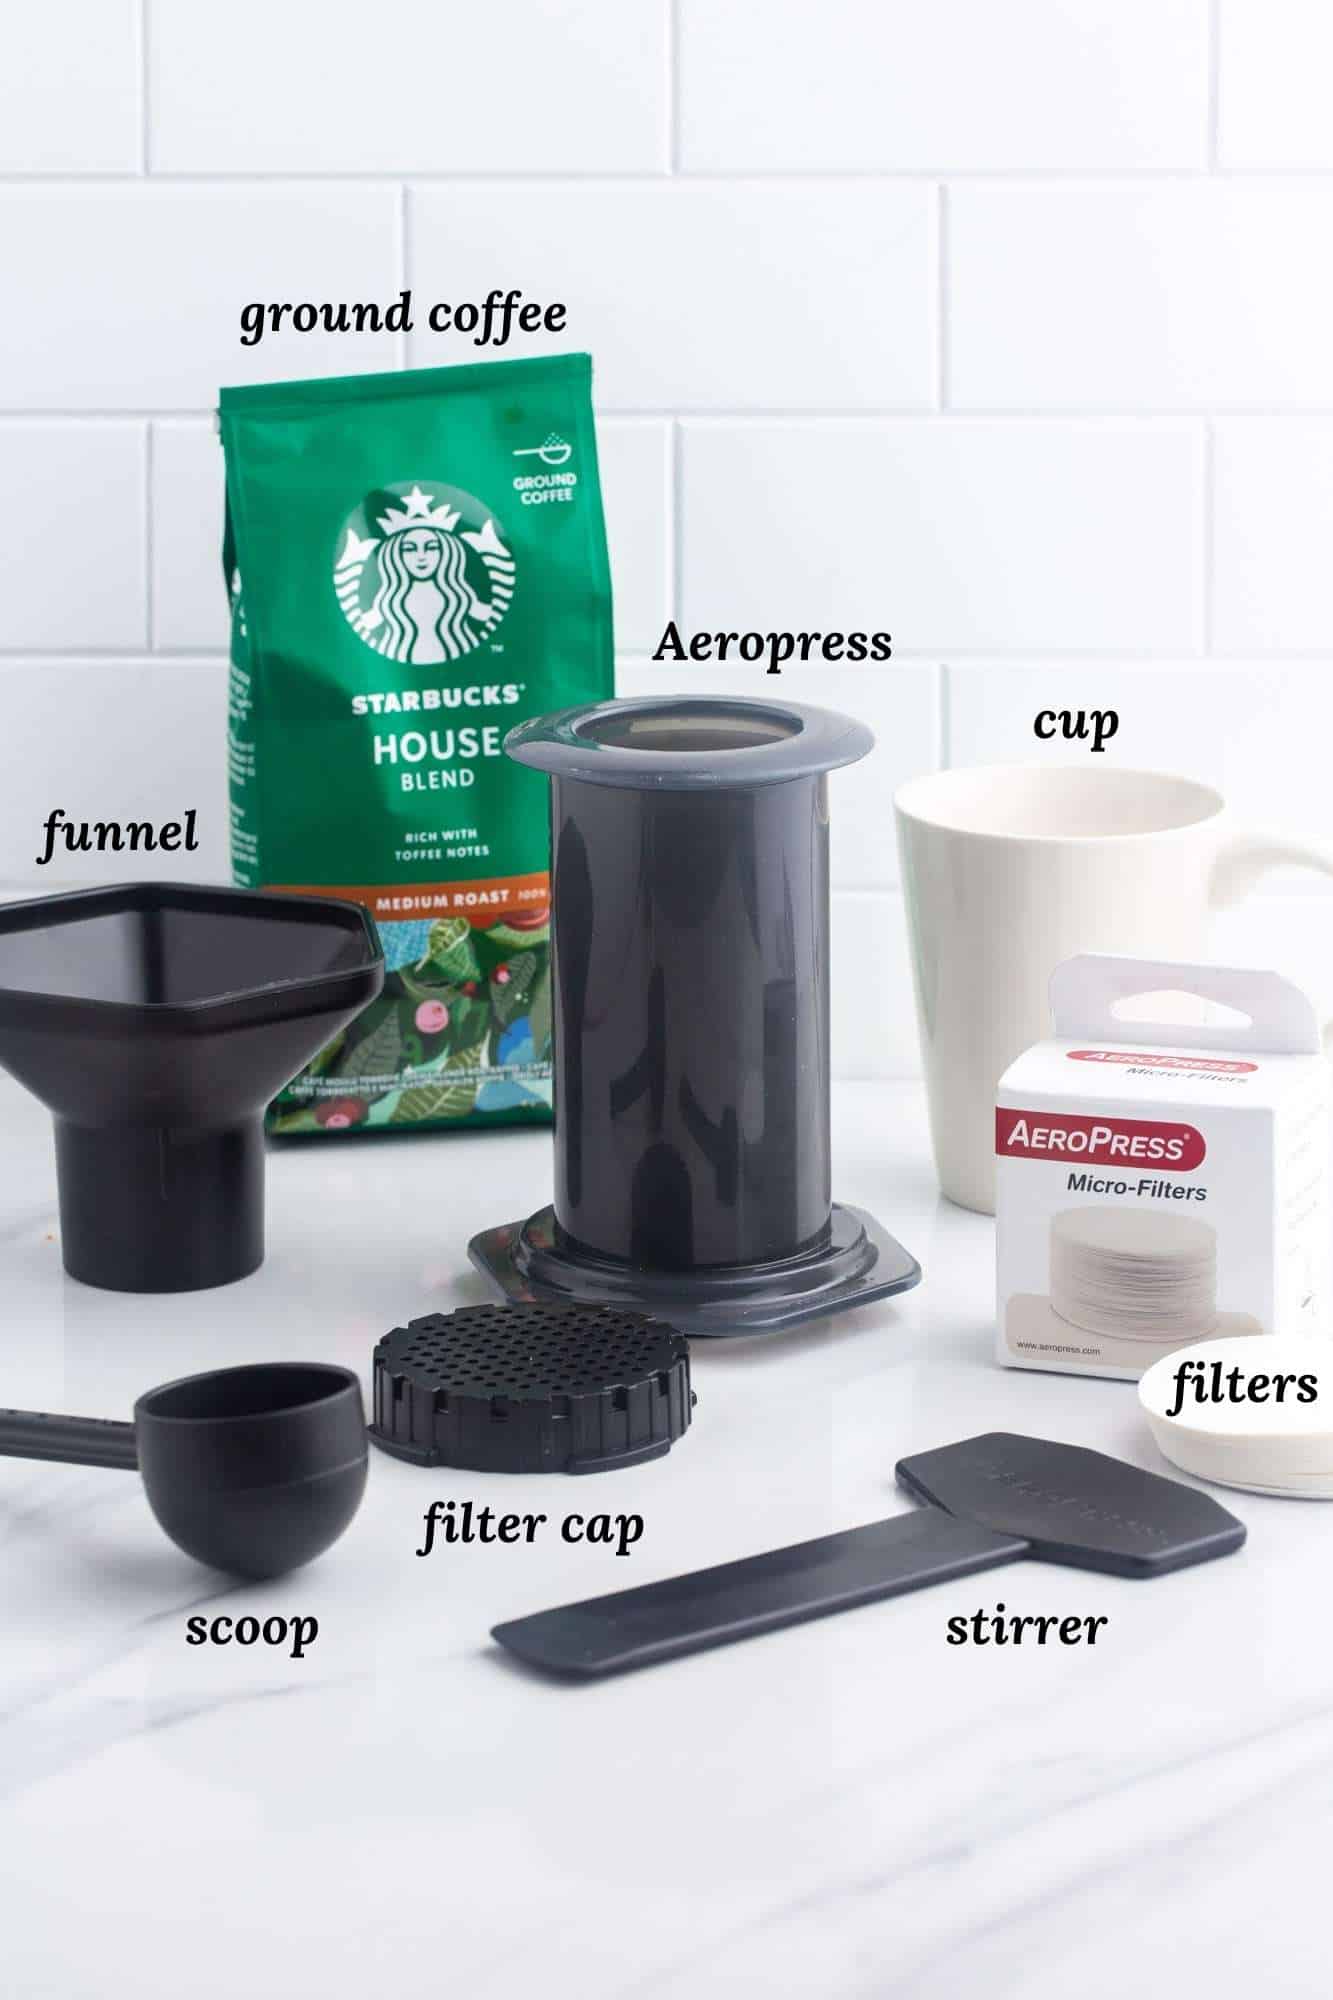 what you need to make aeropress coffee, including the brewer, parts, and accessories, a bag of starbucks coffee and a coffee cup